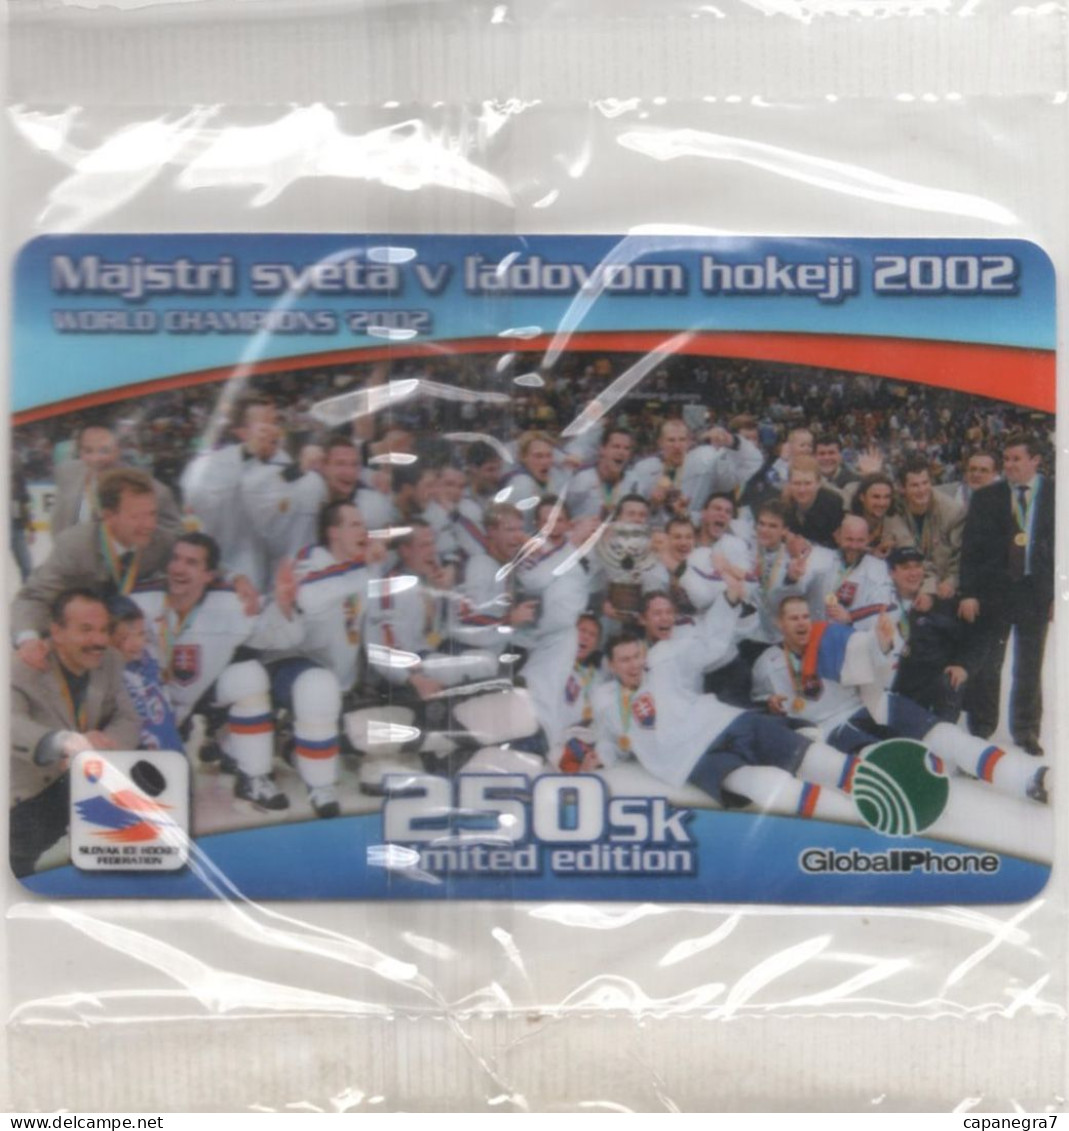 World Champions In Ice Hockey 2002,  Prepaid Calling Card, 250 Sk., 1.000 Pc., GlobalIPhone, Slovakia, Mint, Packed - Slovaquie